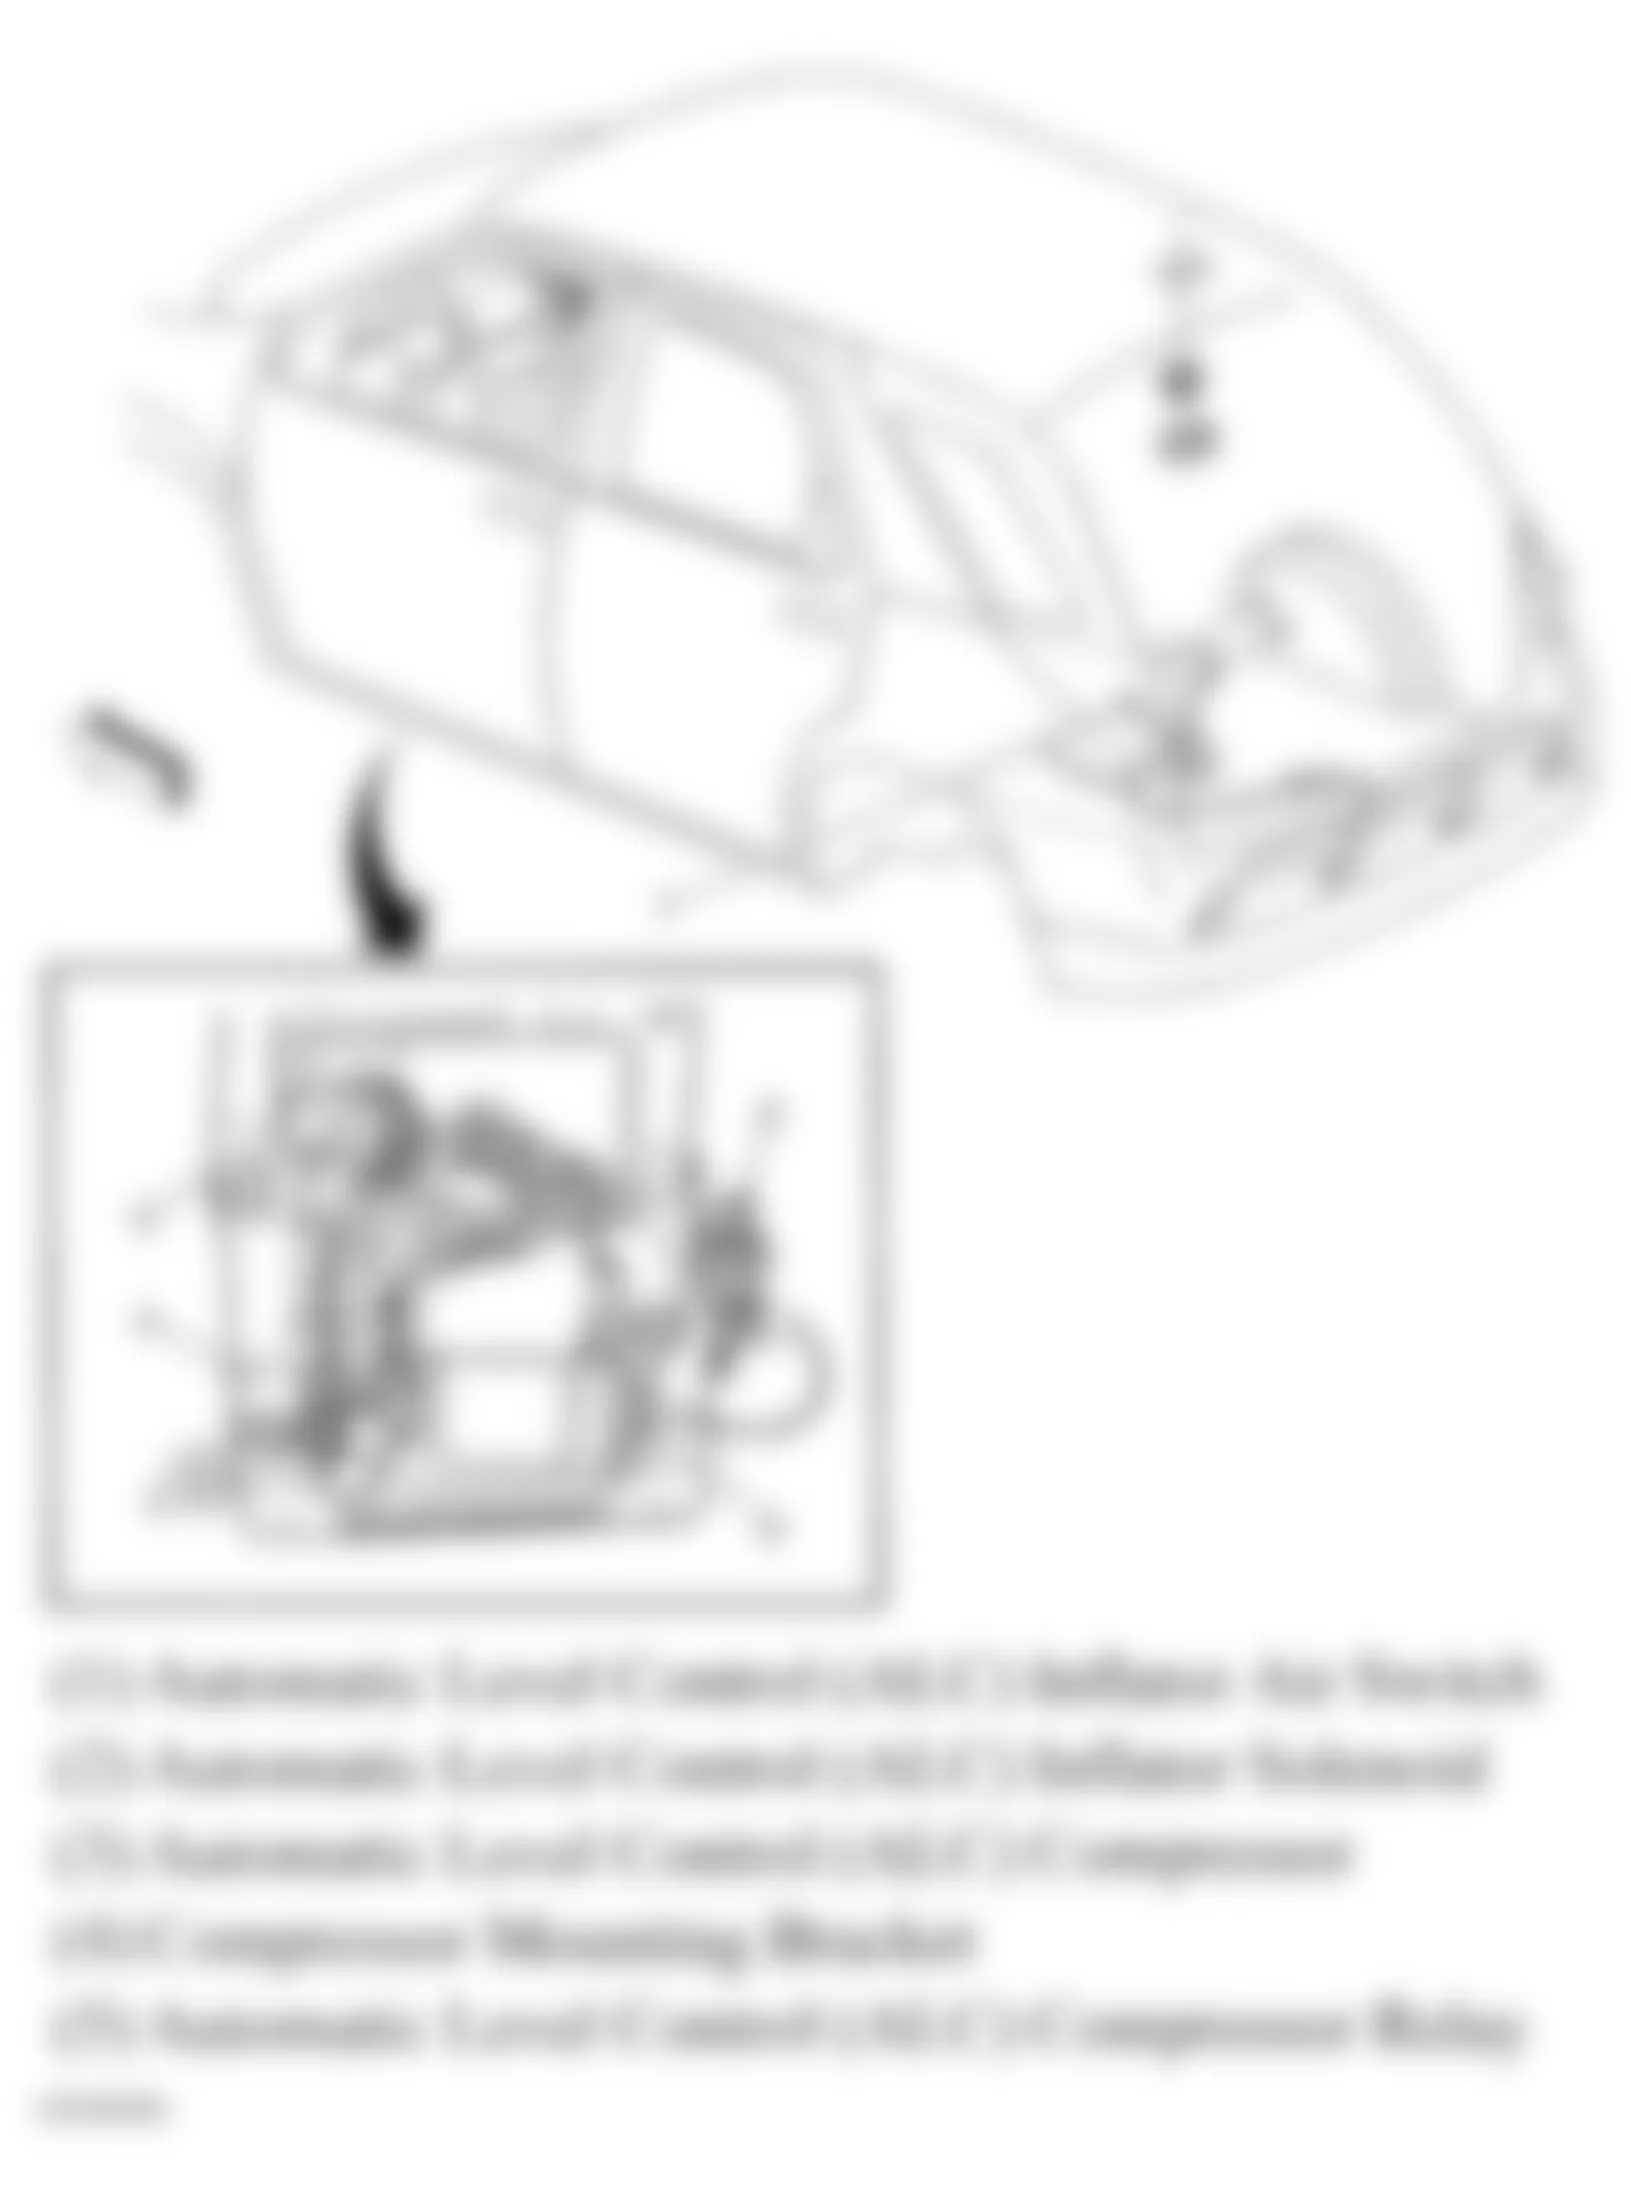 Buick Rendezvous CXL 2007 - Component Locations -  Rear Of Vehicle